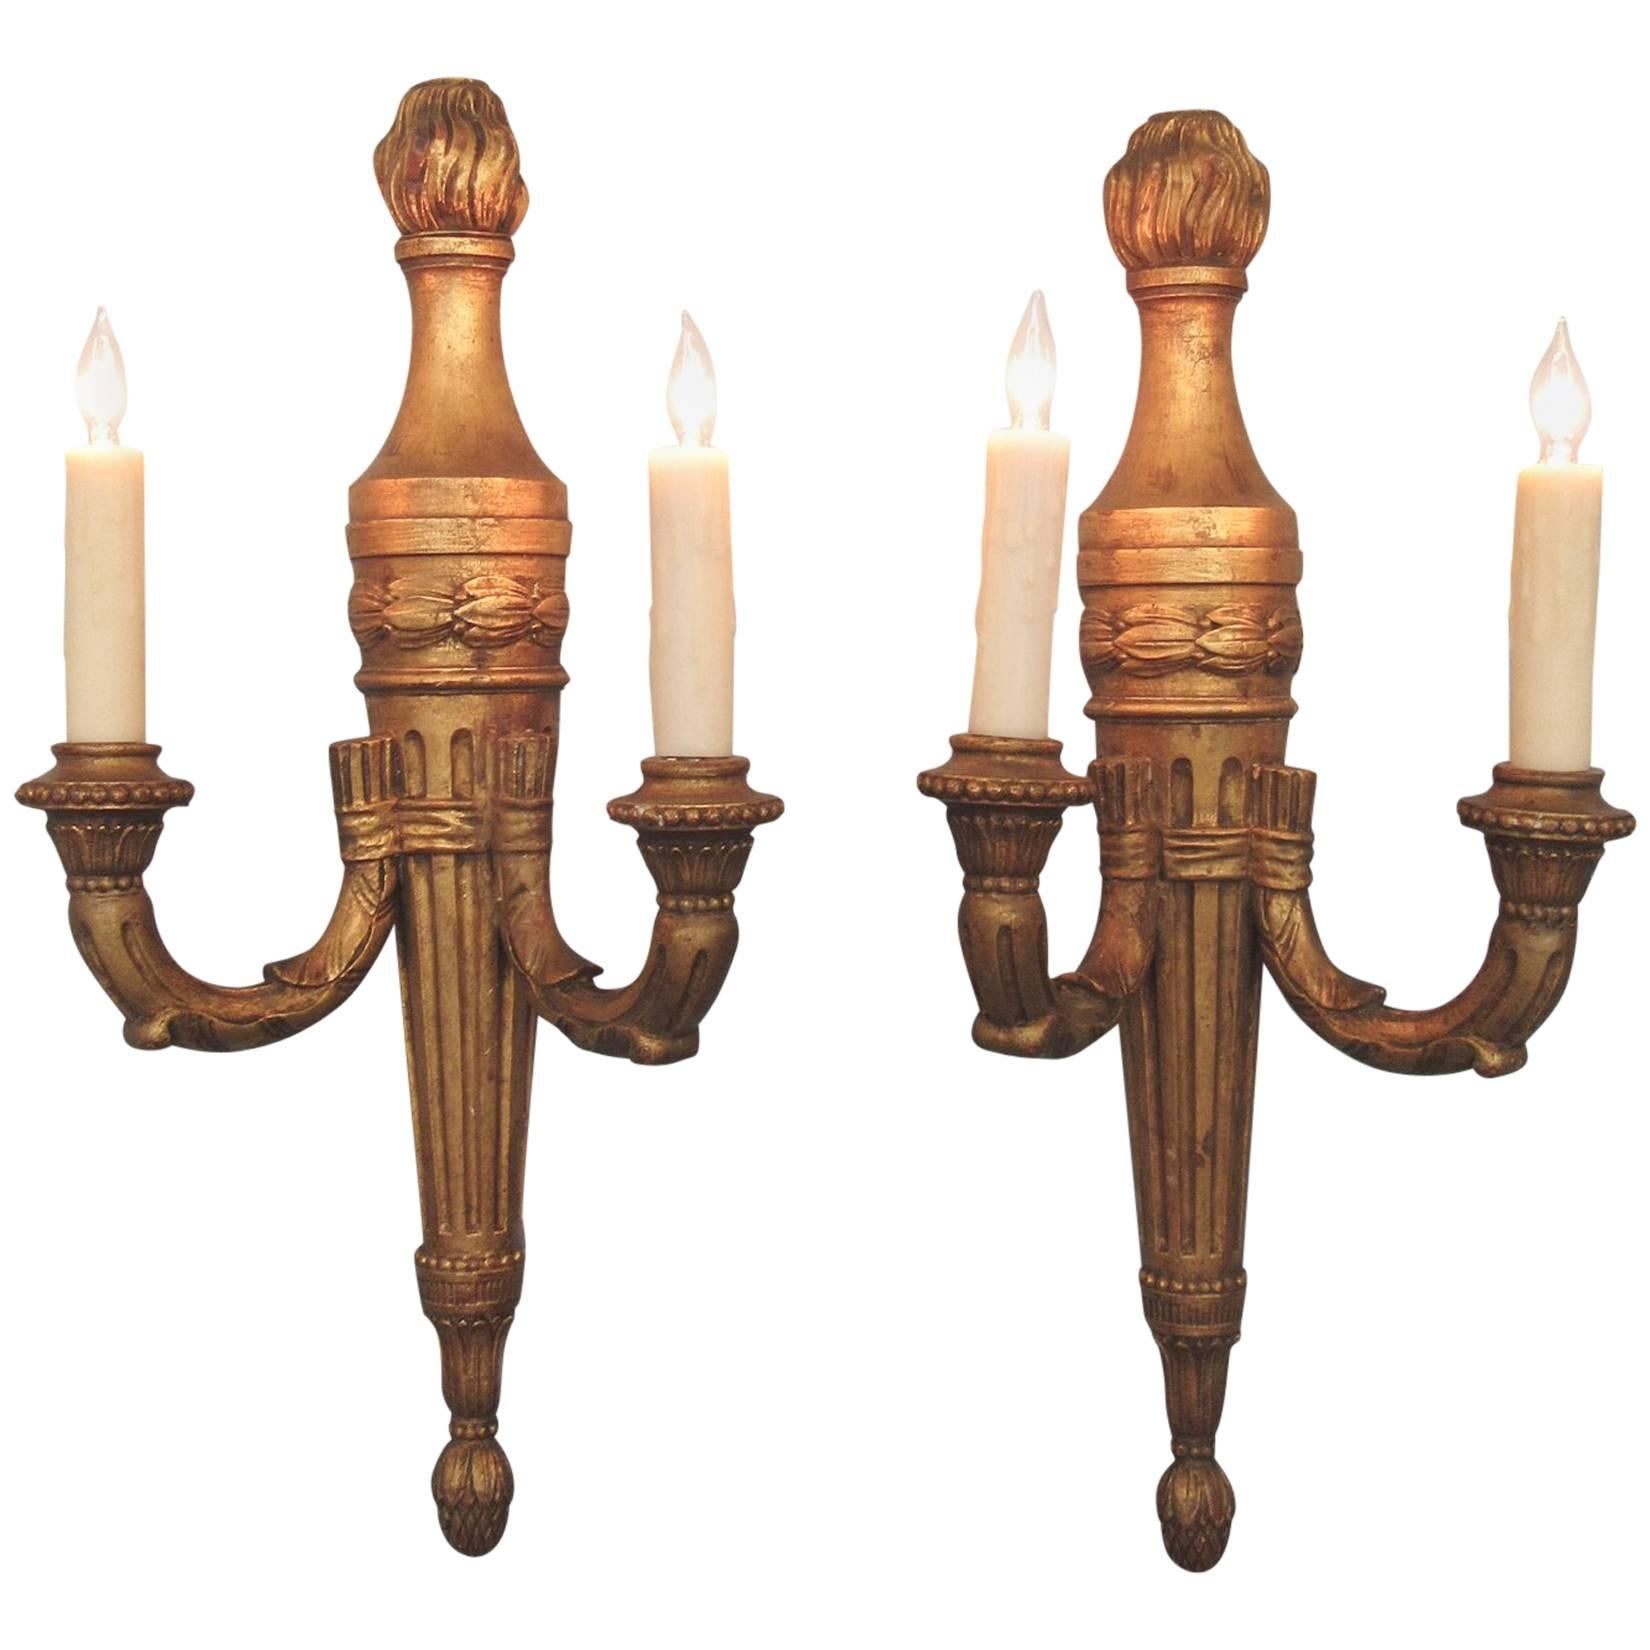 Pair of Early 20th Century Italian Neoclassical Giltwood Torchiere Sconces